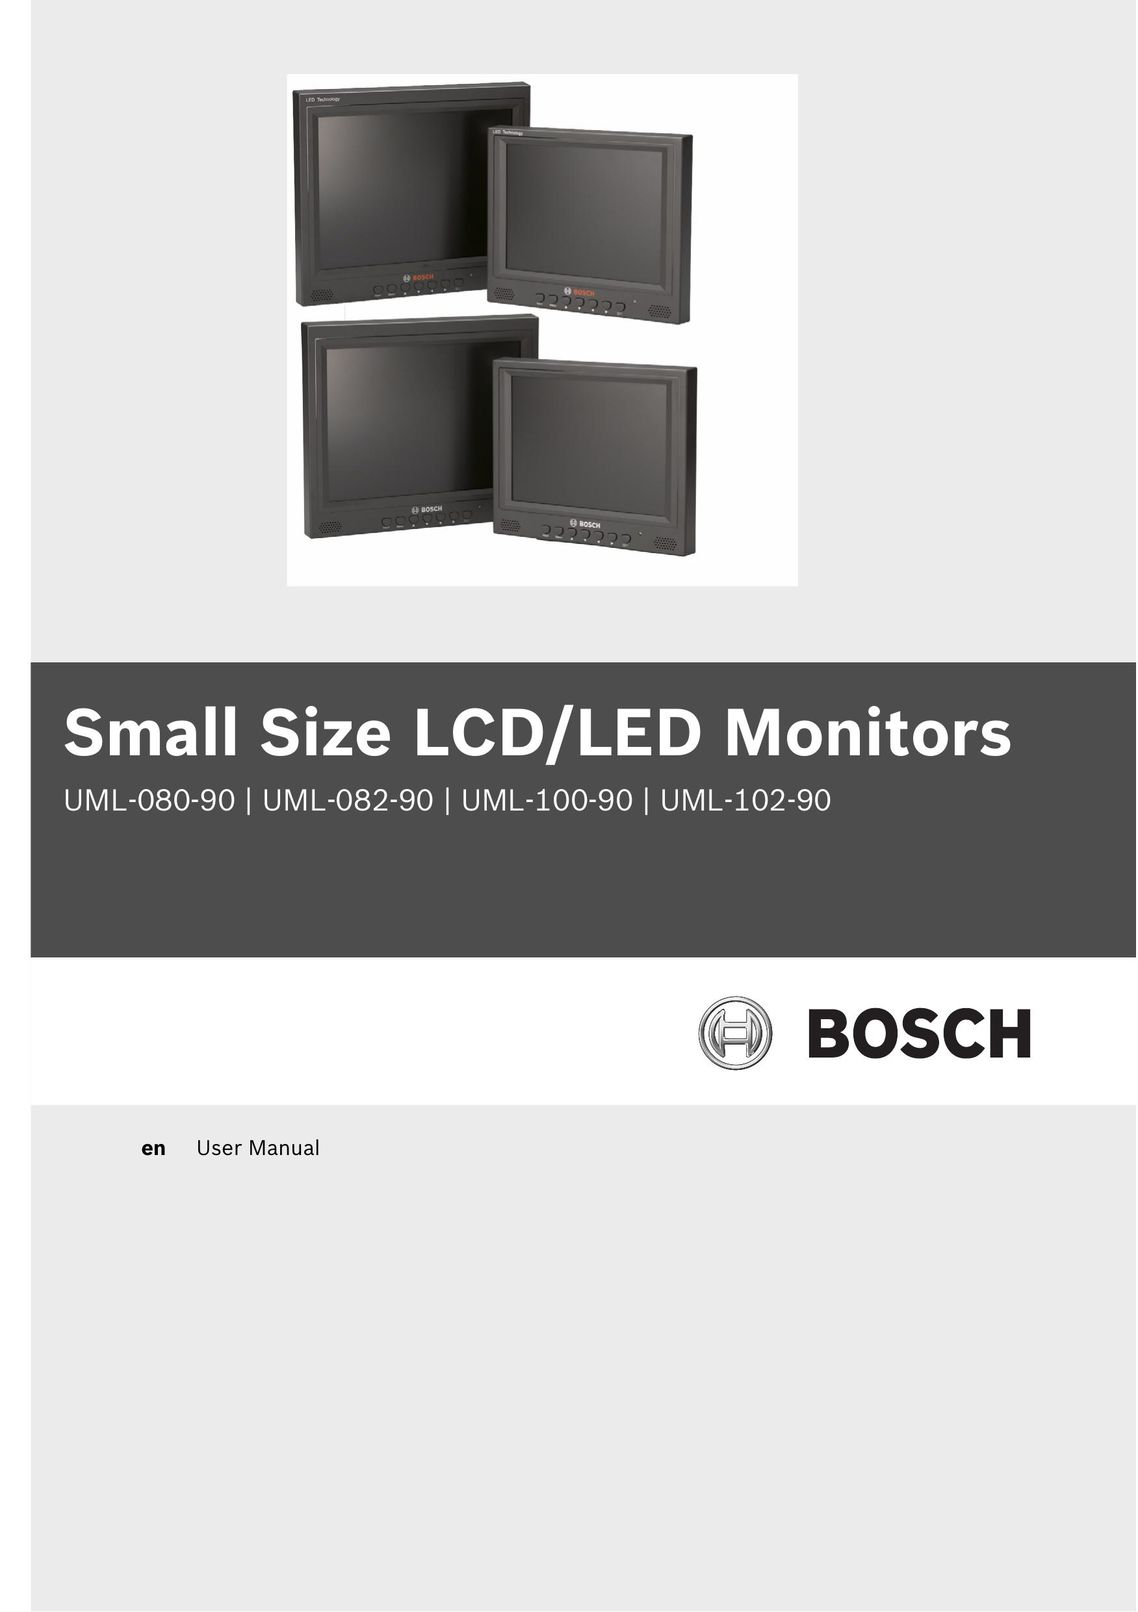 Bosch Appliances UML-100-90 Computer Monitor User Manual (Page 1)